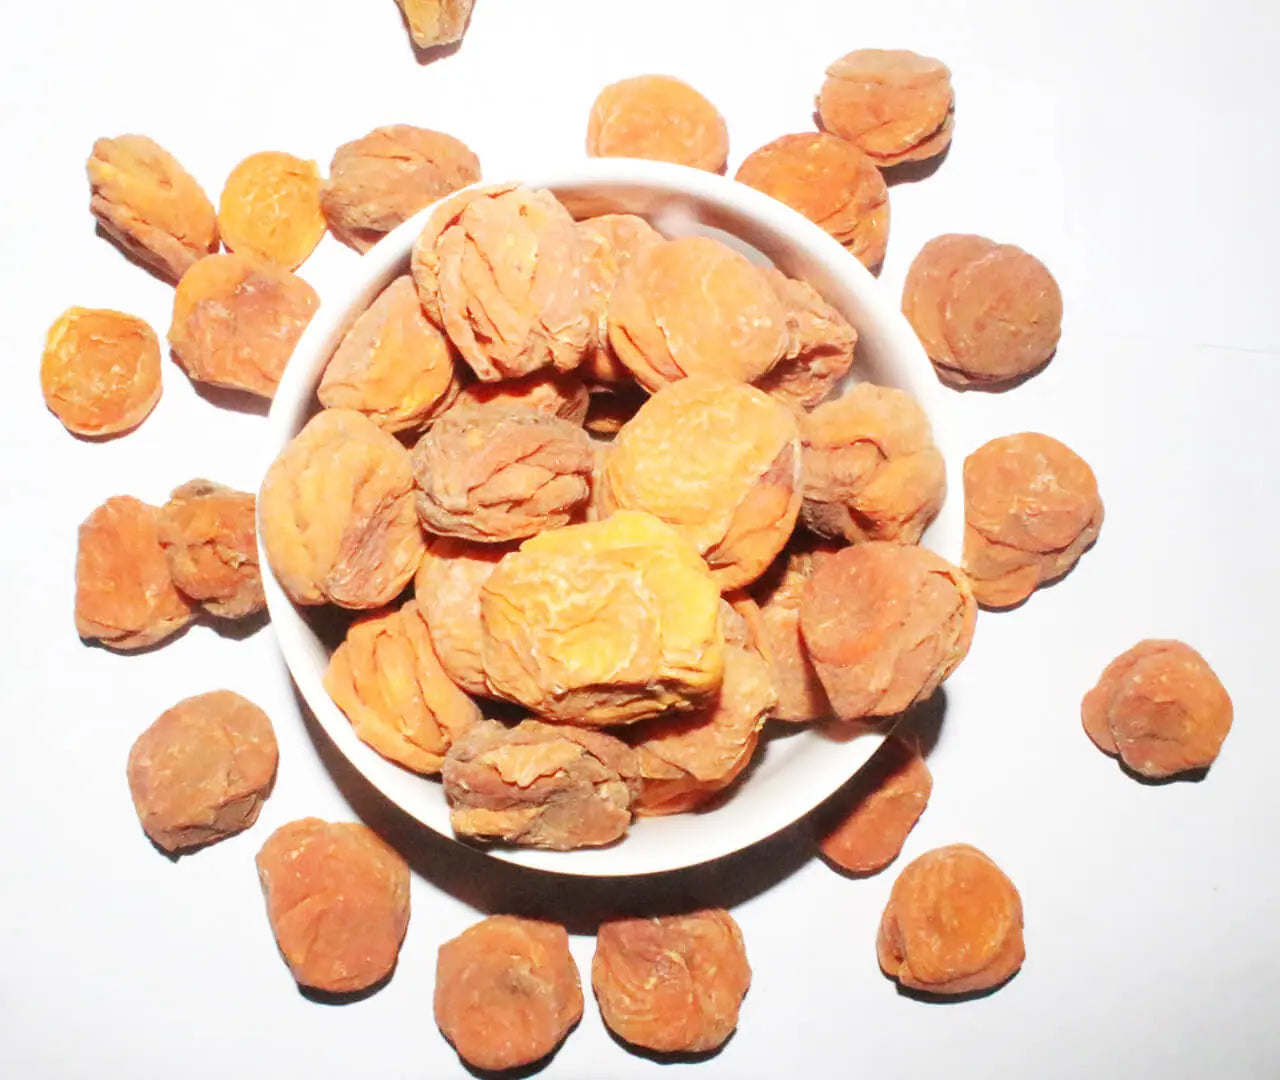 DRIED APRICOT MULTIPLE LAYERED WITH SULPHAR